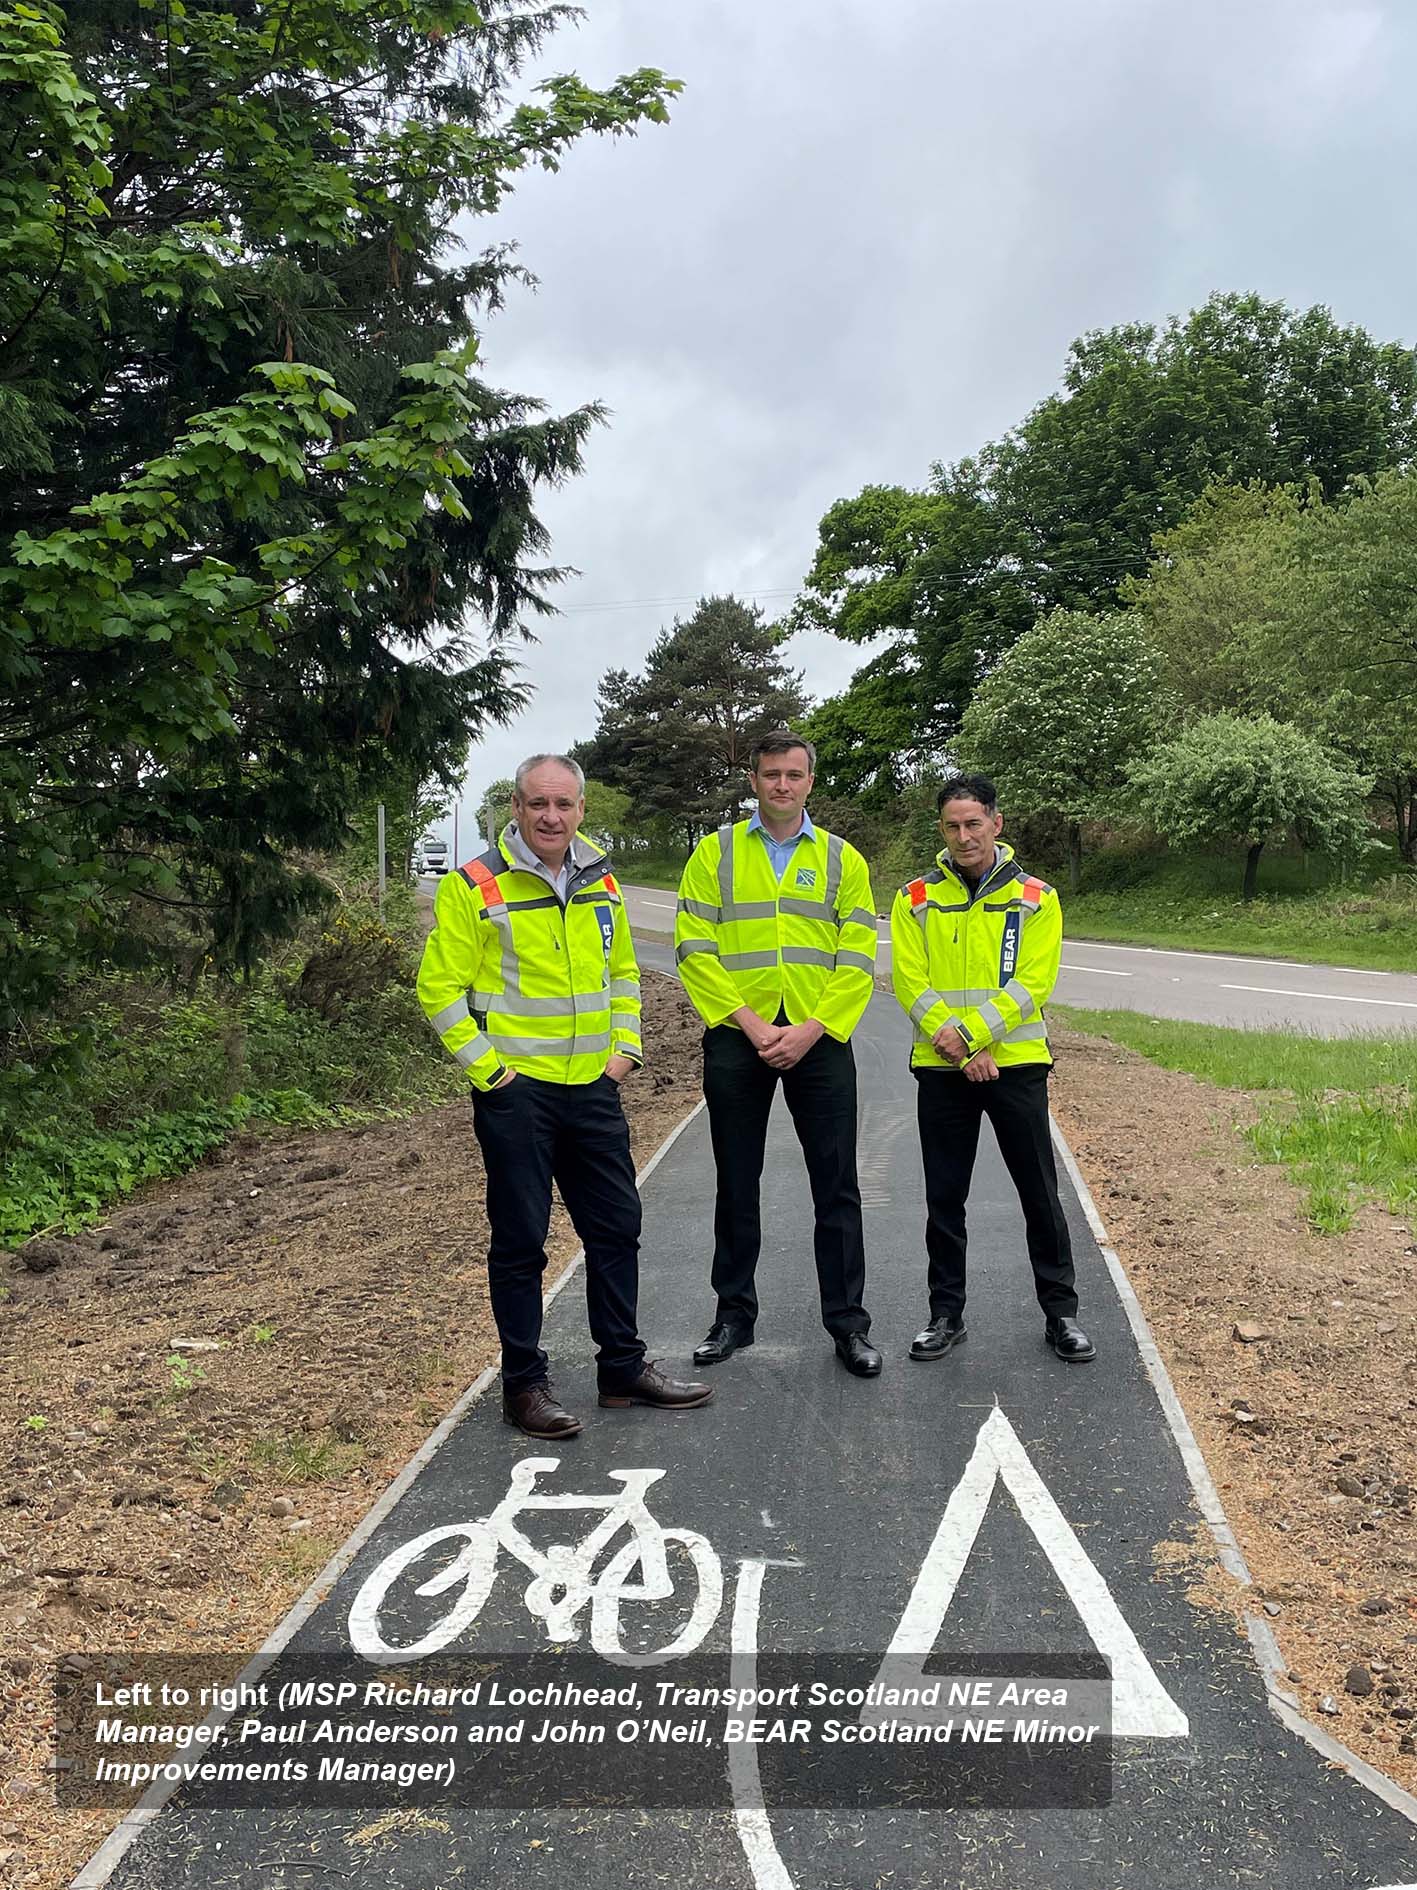 CONSTRUCTION OF A NEW SECTION OF FOOTWAY AND CYCLEWAY ON THE A96 NEAR LHANBRYDE HAS BEEN COMPLETED